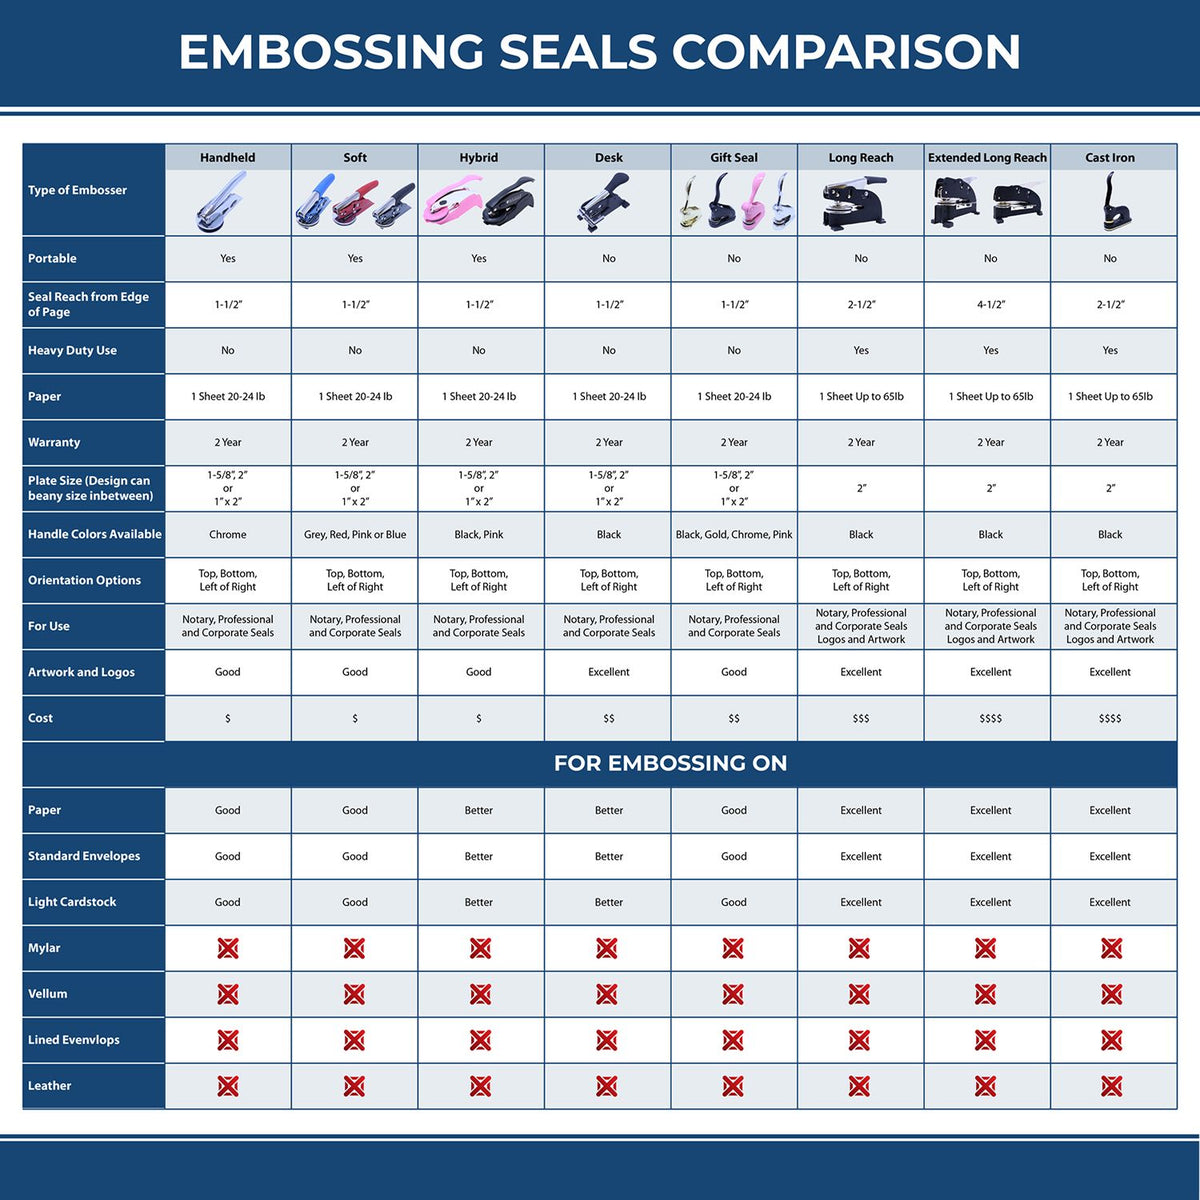 A comparison chart for the different types of mount models available for the Handheld Kansas Land Surveyor Seal.